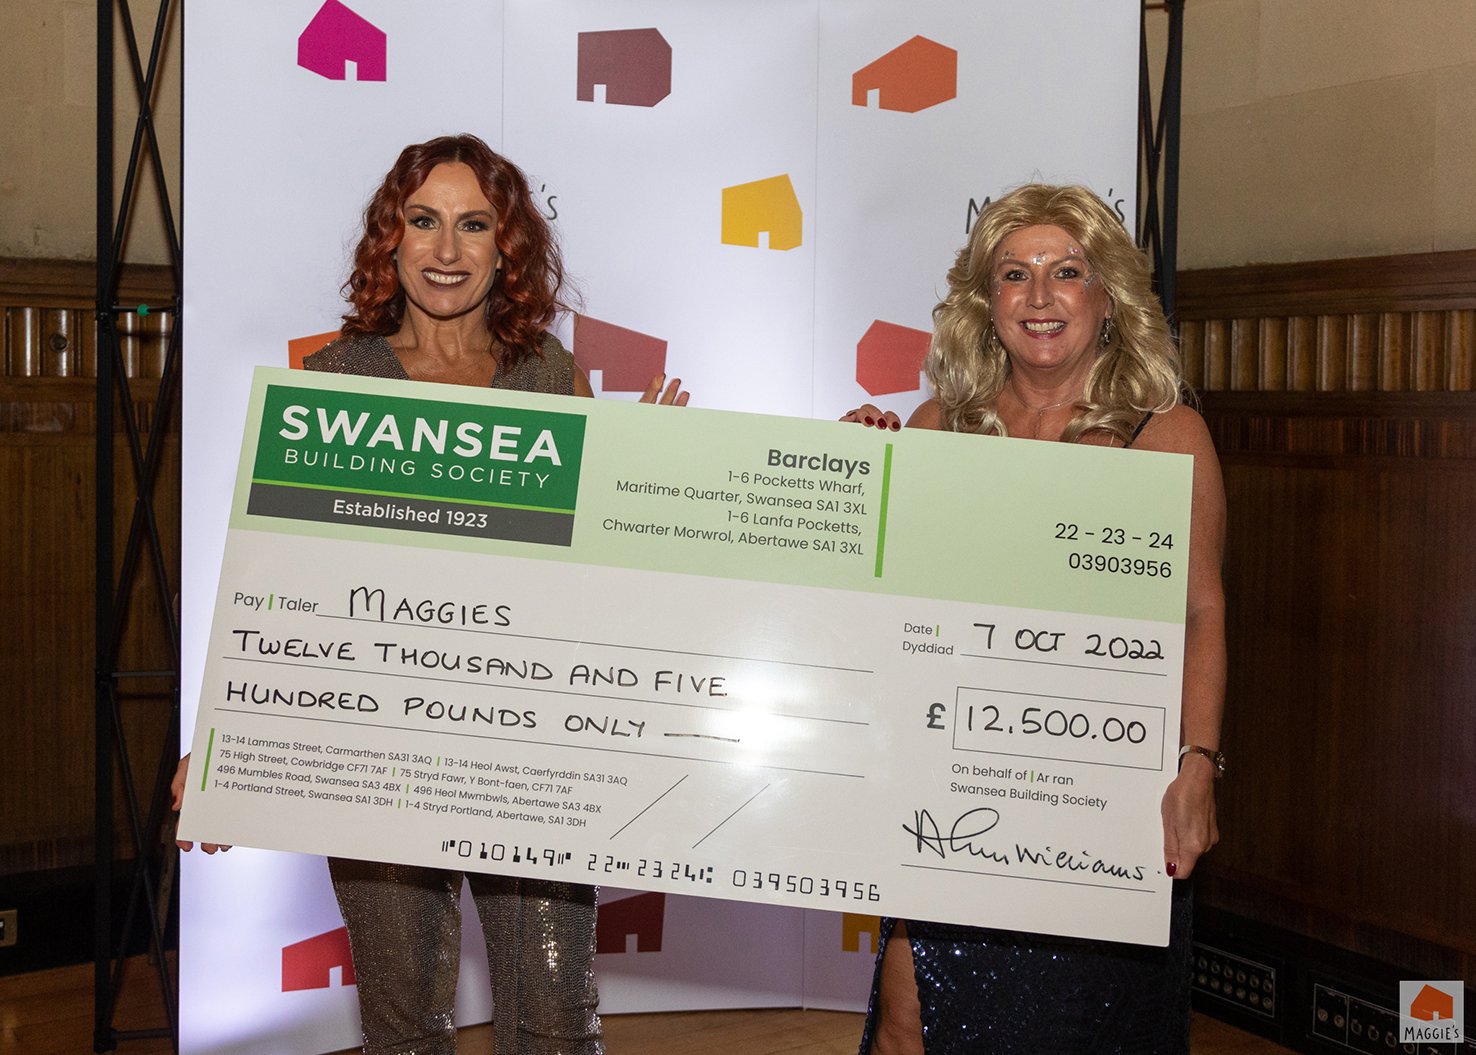 We donate over £12K to Maggie’s cancer charity